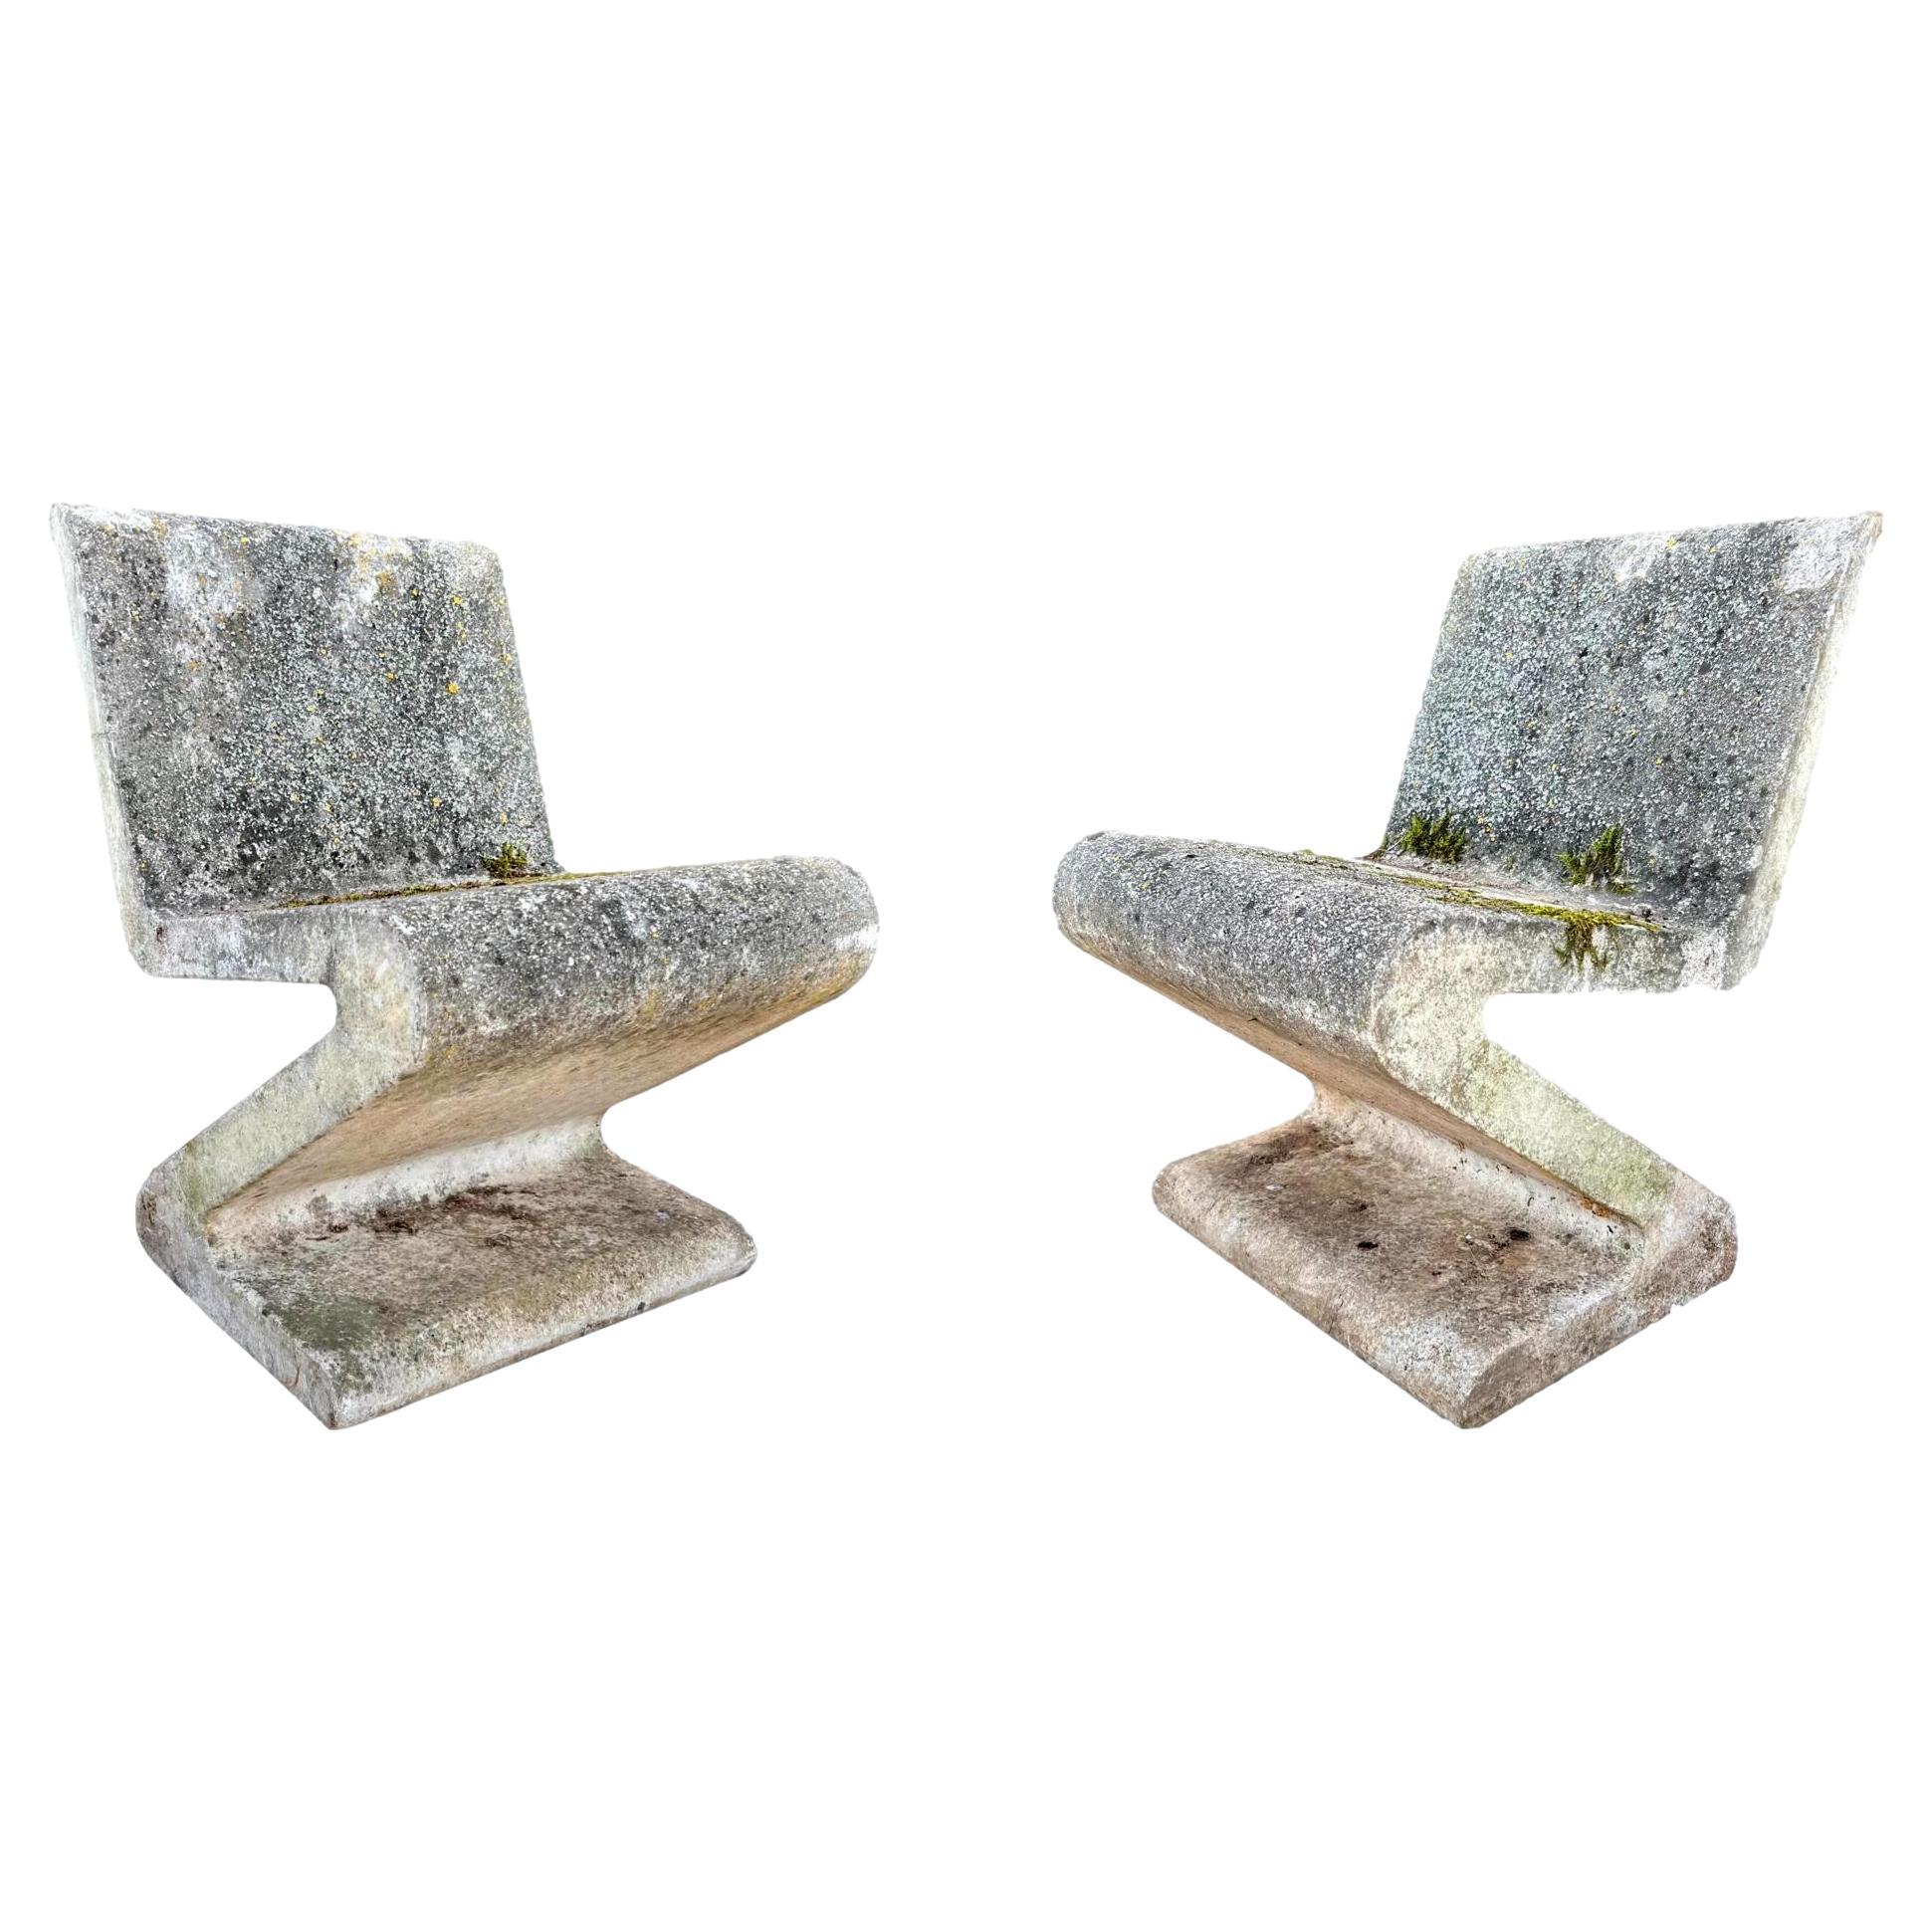 Pair of Sculptural Concrete Zig Zag Chairs, 1960s Switzerland For Sale